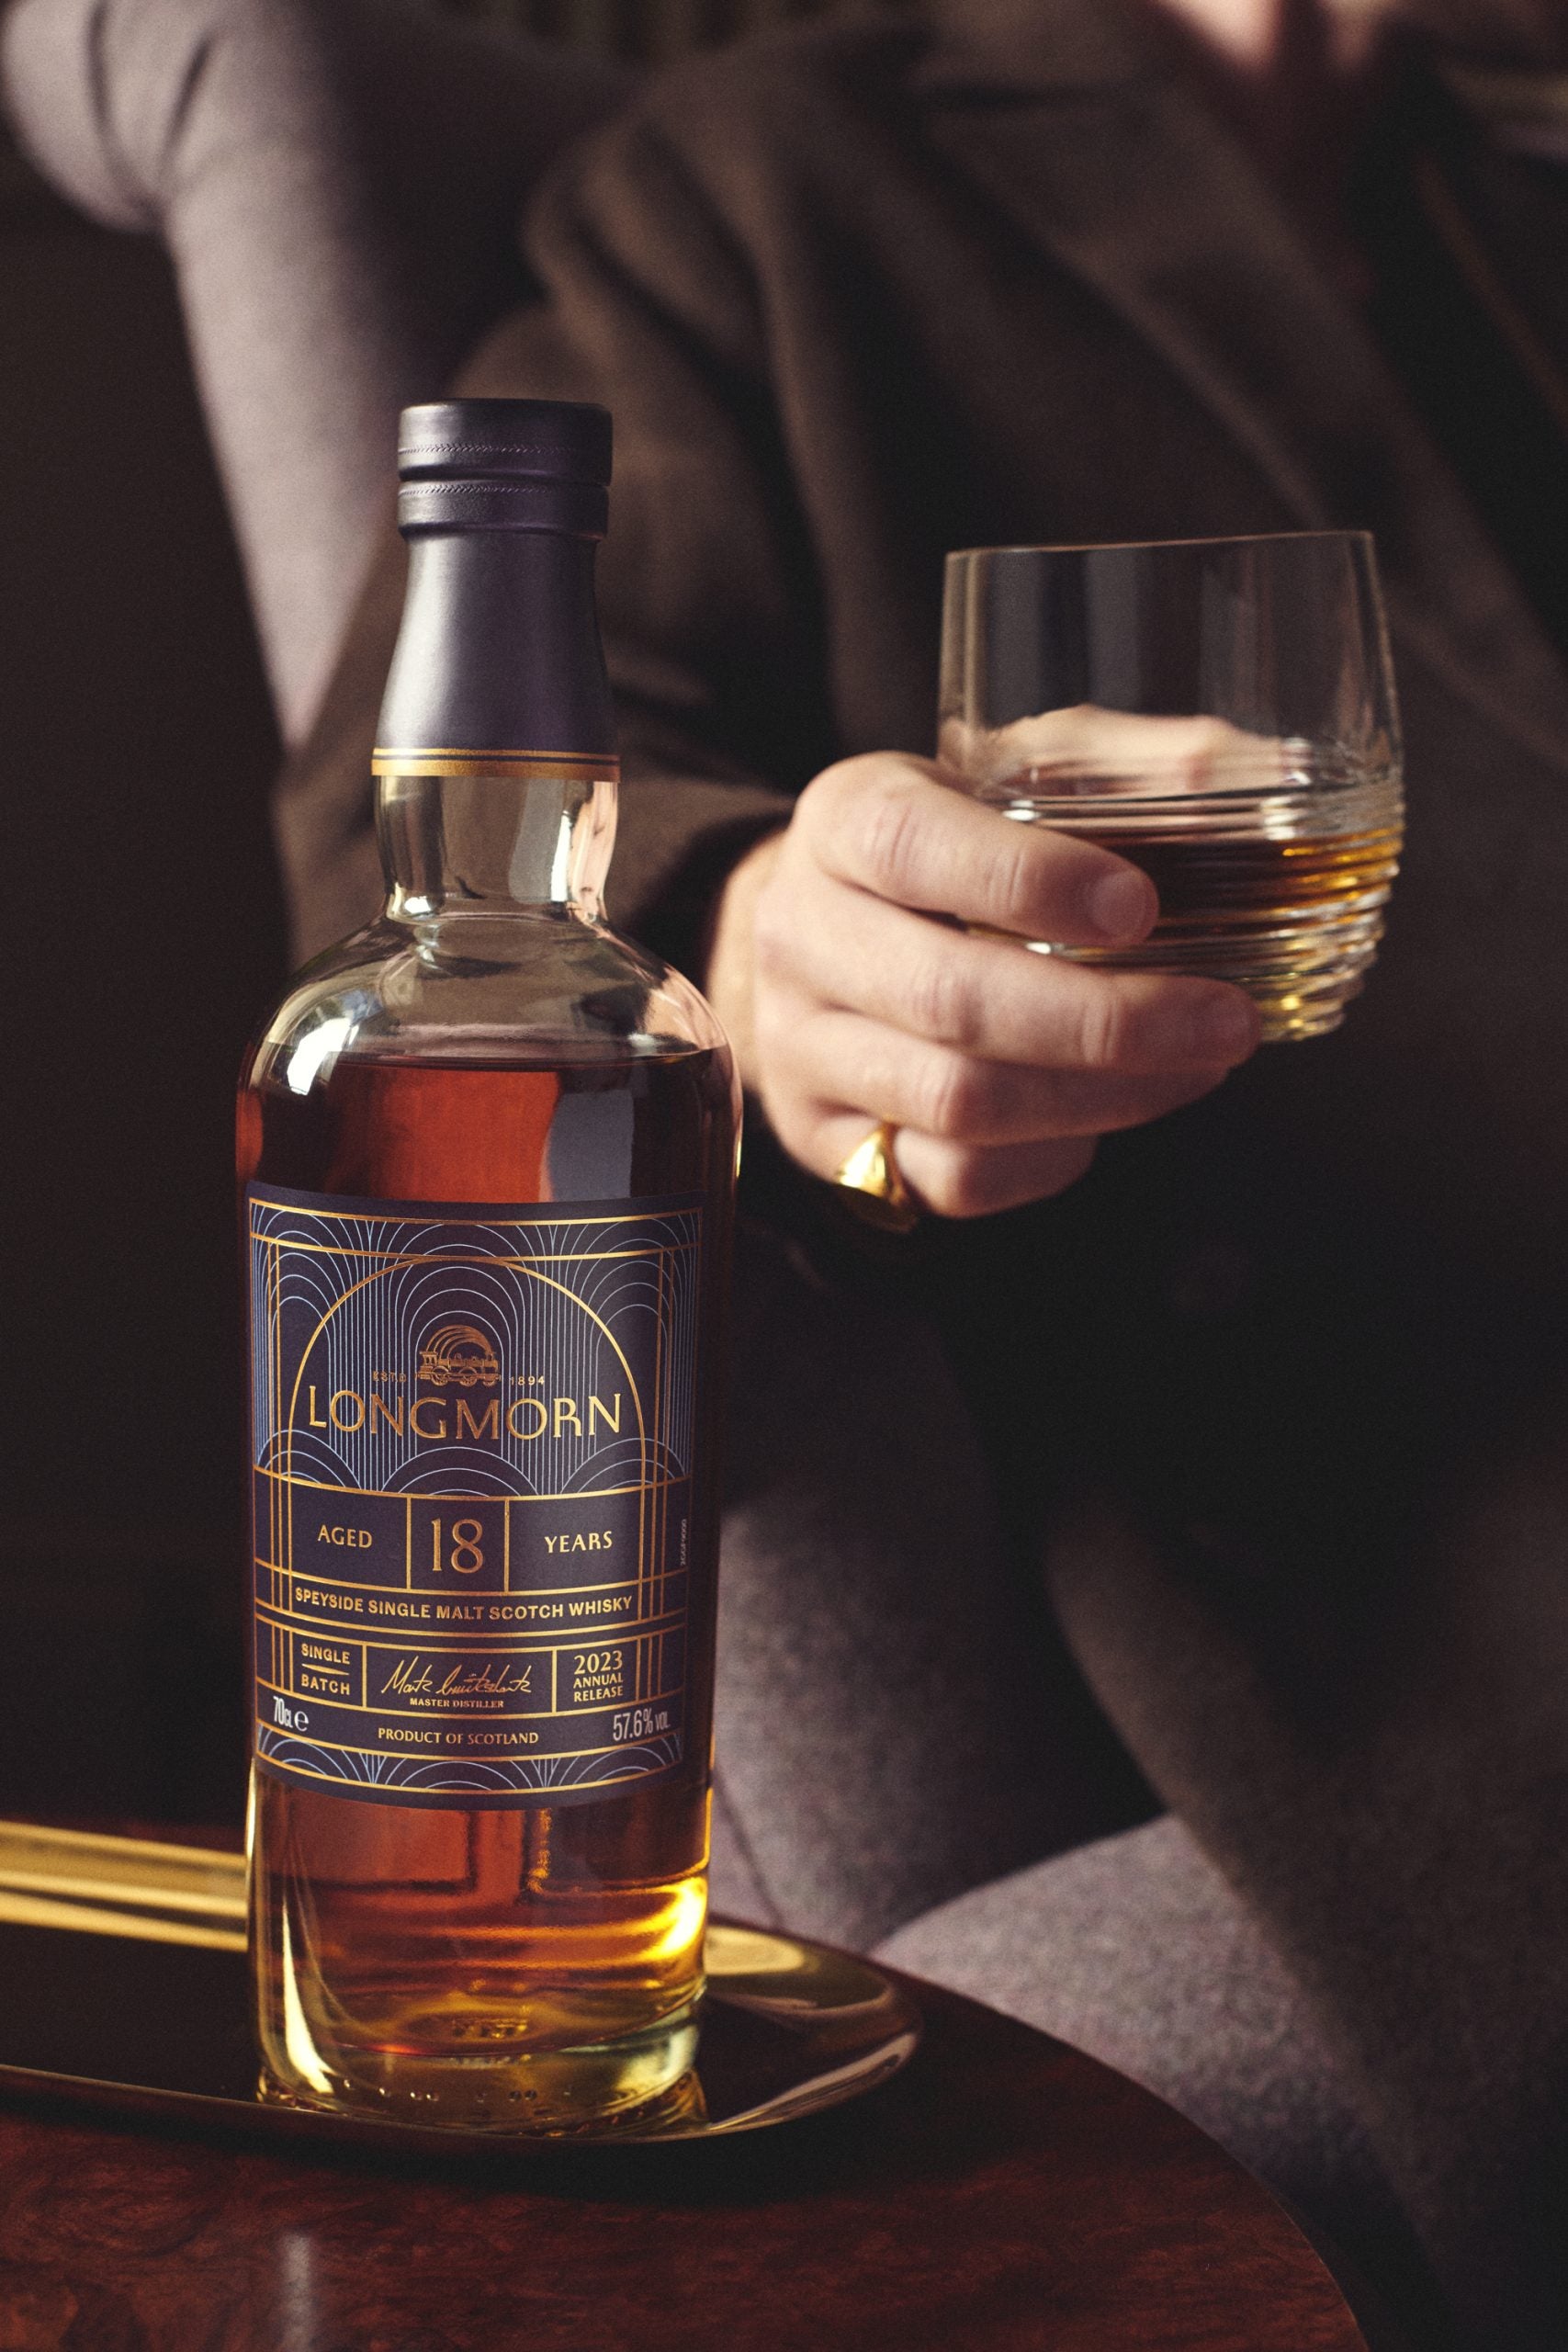 A hand holding a glass of whisky with a bottle of 18 Year Old Longmorn Whisky